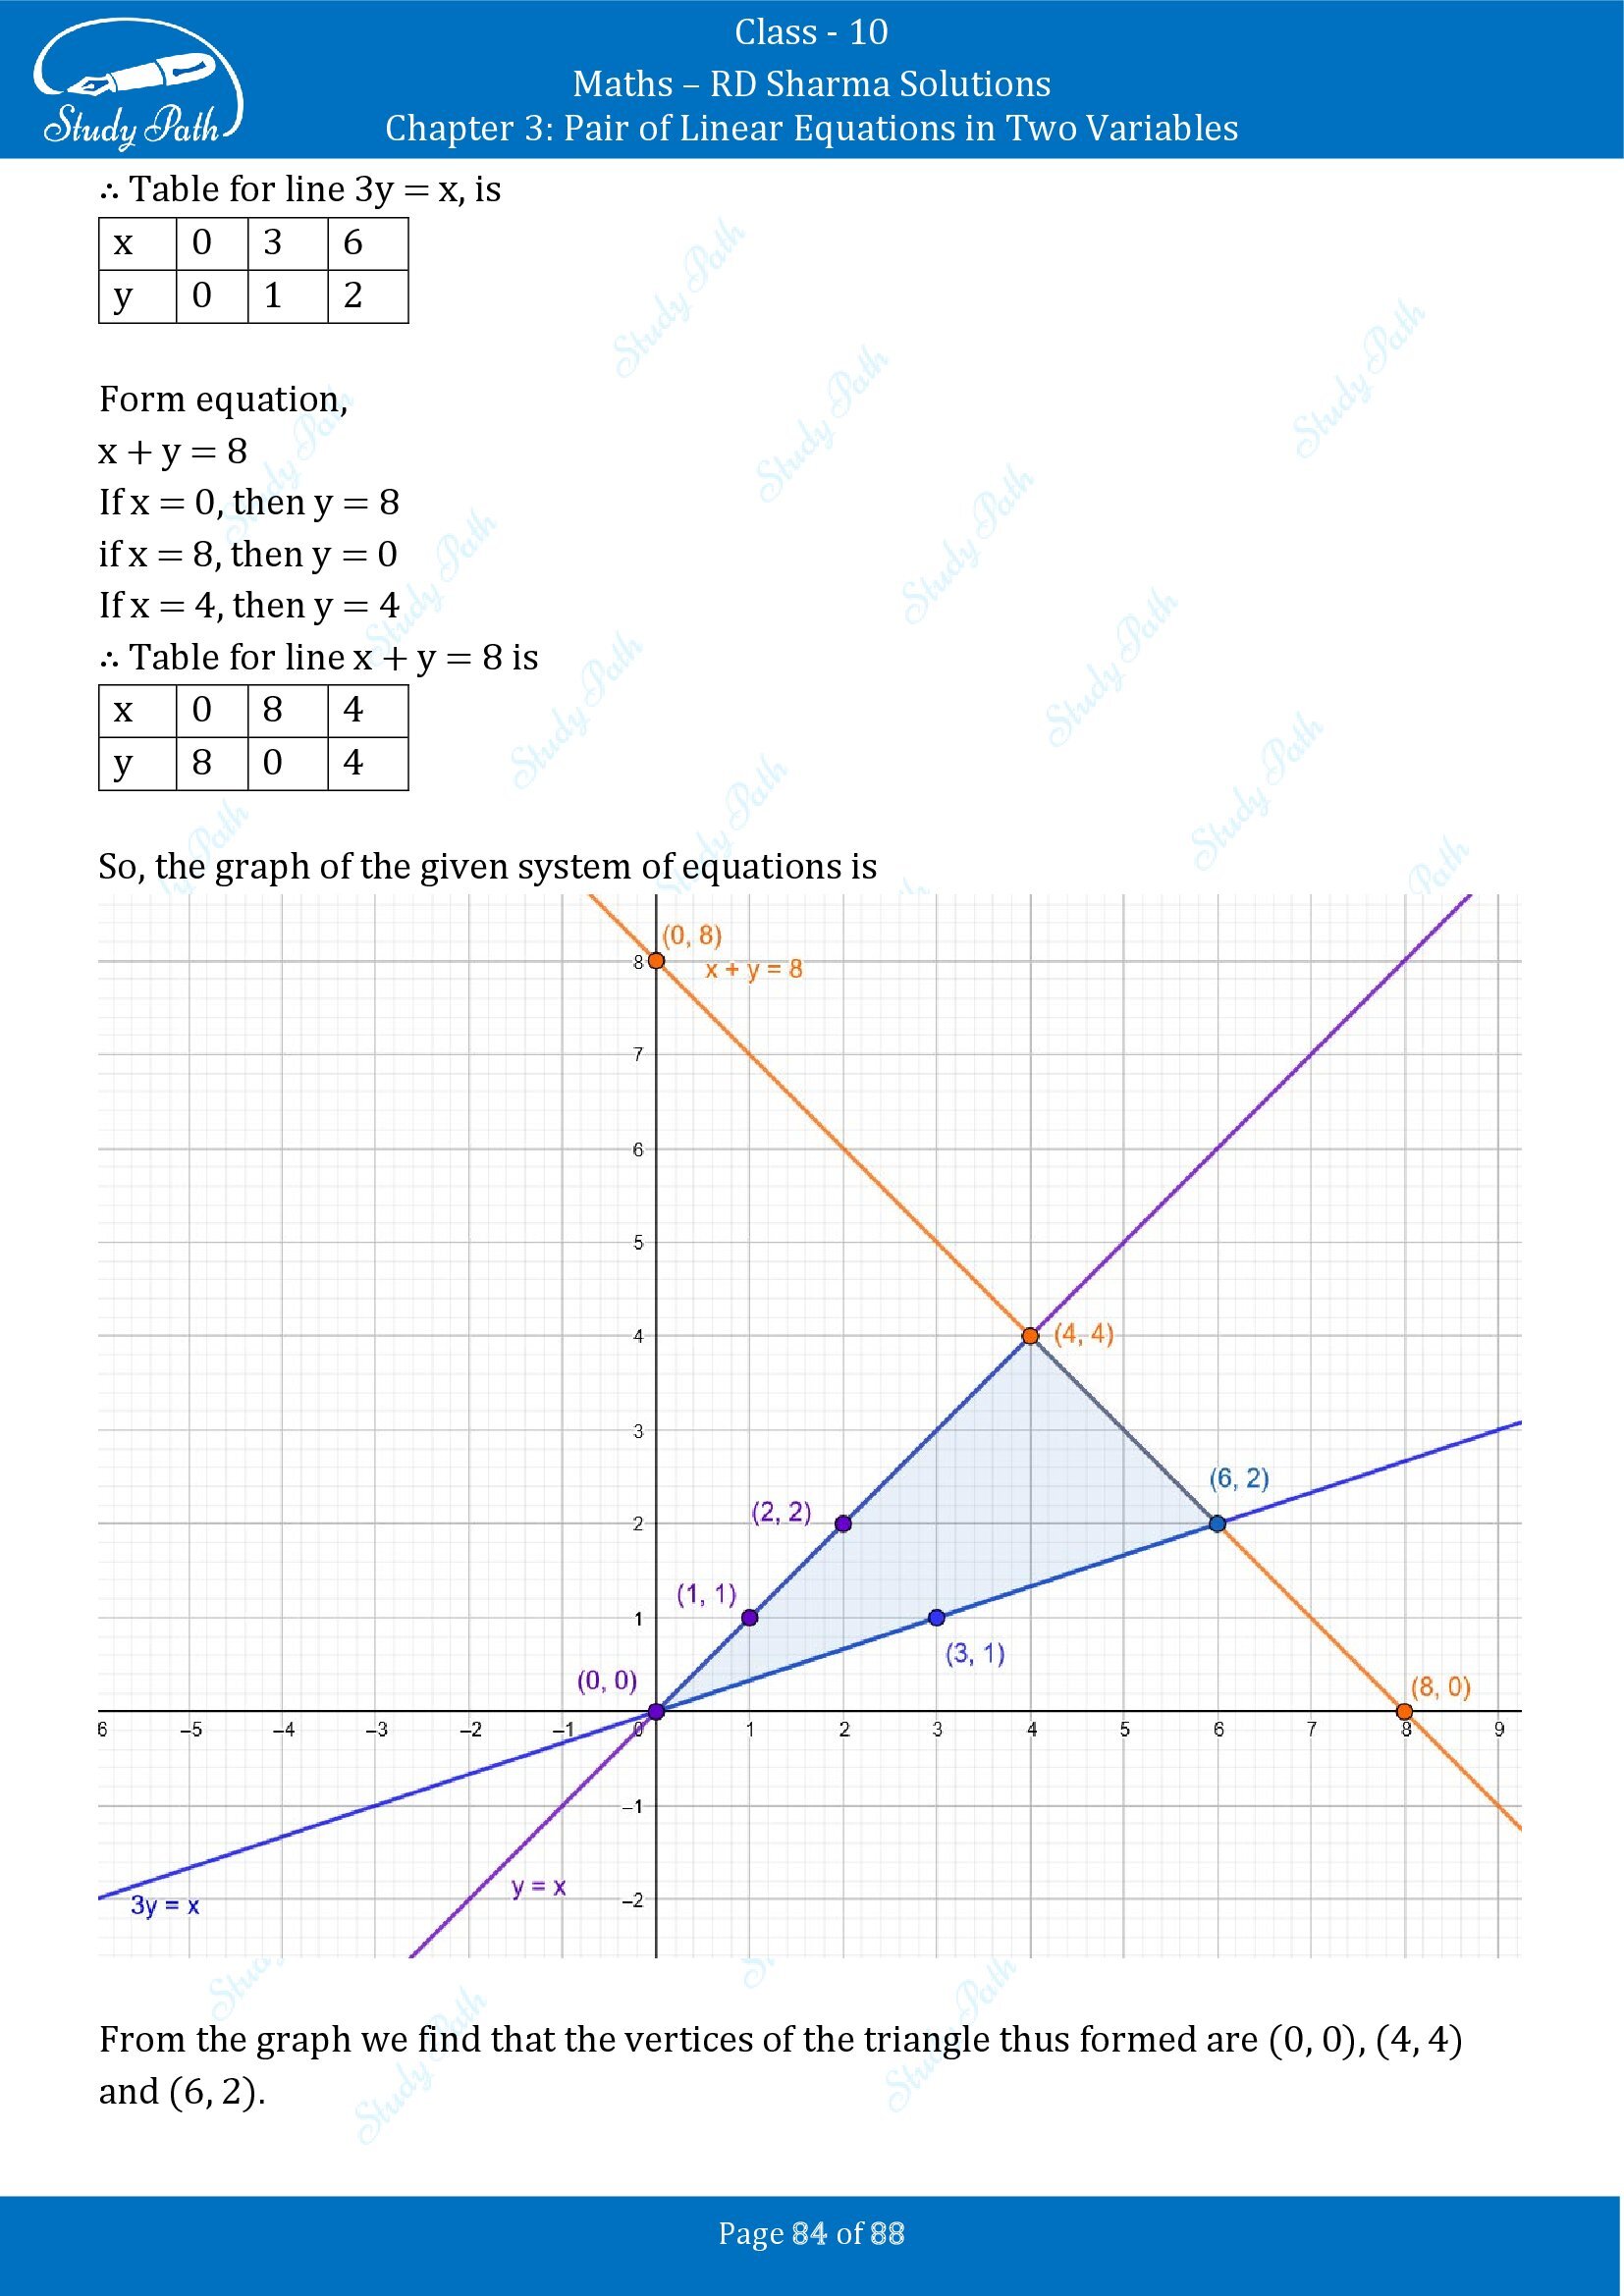 RD Sharma Solutions Class 10 Chapter 3 Pair of Linear Equations in Two Variables Exercise 3.2 00084